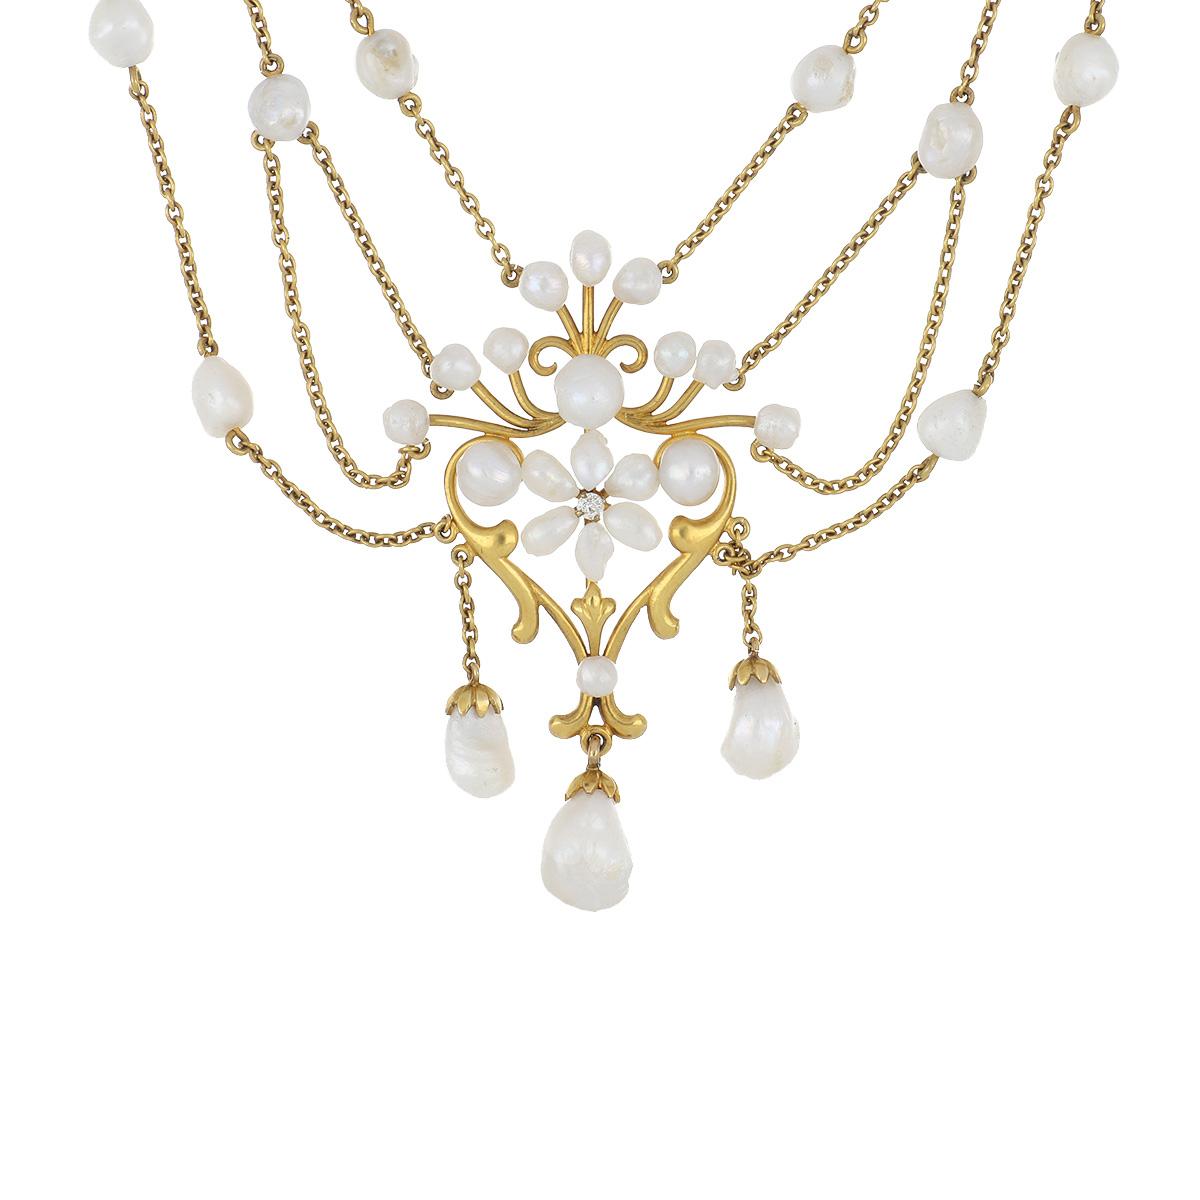 Art Nouveau 14K yellow gold floral swag necklace.  There are 3 florets each centered with diamonds and freshwater pearls.  The necklace measures 15 3/4 inches in length. Circa 1900.